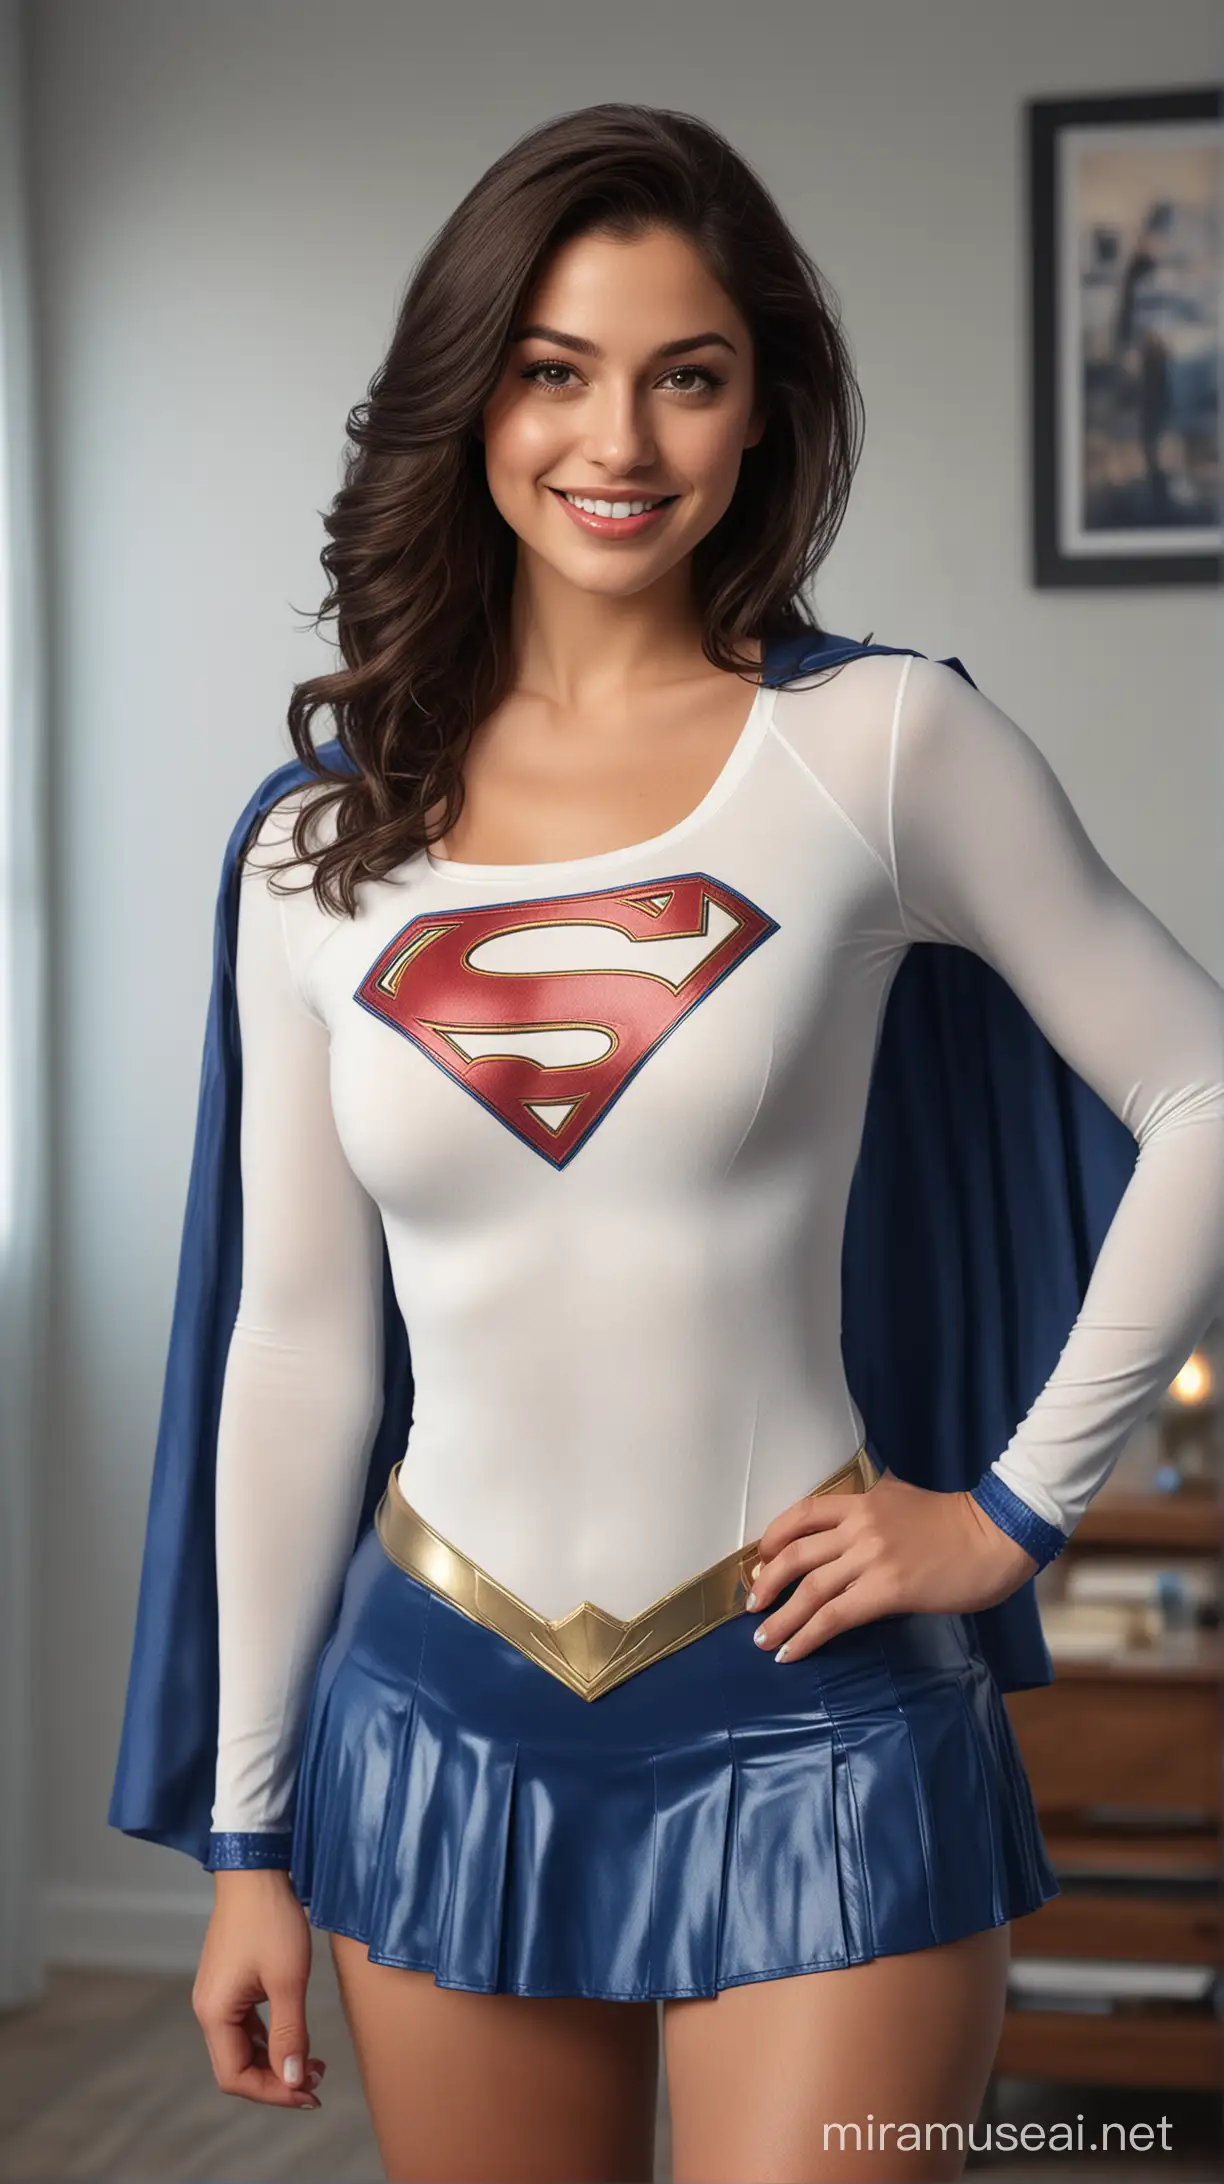 A captivating and hyper-realistic photo of a woman of stunning beauty with an infectious radiant smile, who is dressed in a white bodysuit and a short blue skirt with a prominent blue emblem on the chest, symbolizing the iconic Supergirl. She has long, wavy dark hair, standing in a spotless, bright room, exuding comfort and warmth through its impeccable cleanliness and warm lighting. The beautiful woman looks directly at the viewer with a confident expression. The bodysuit fits the body and highlights your physique. She also wears a blue skirt, a silver belt, a blue cape, and blue boots. The woman's expression conveys joy and fulfillment. The backdrop is a bright room with white walls, a 3D rendering of a cozy atmosphere, a comfortable and impeccably clean home environment, photo, ultra HD rendering, 8K